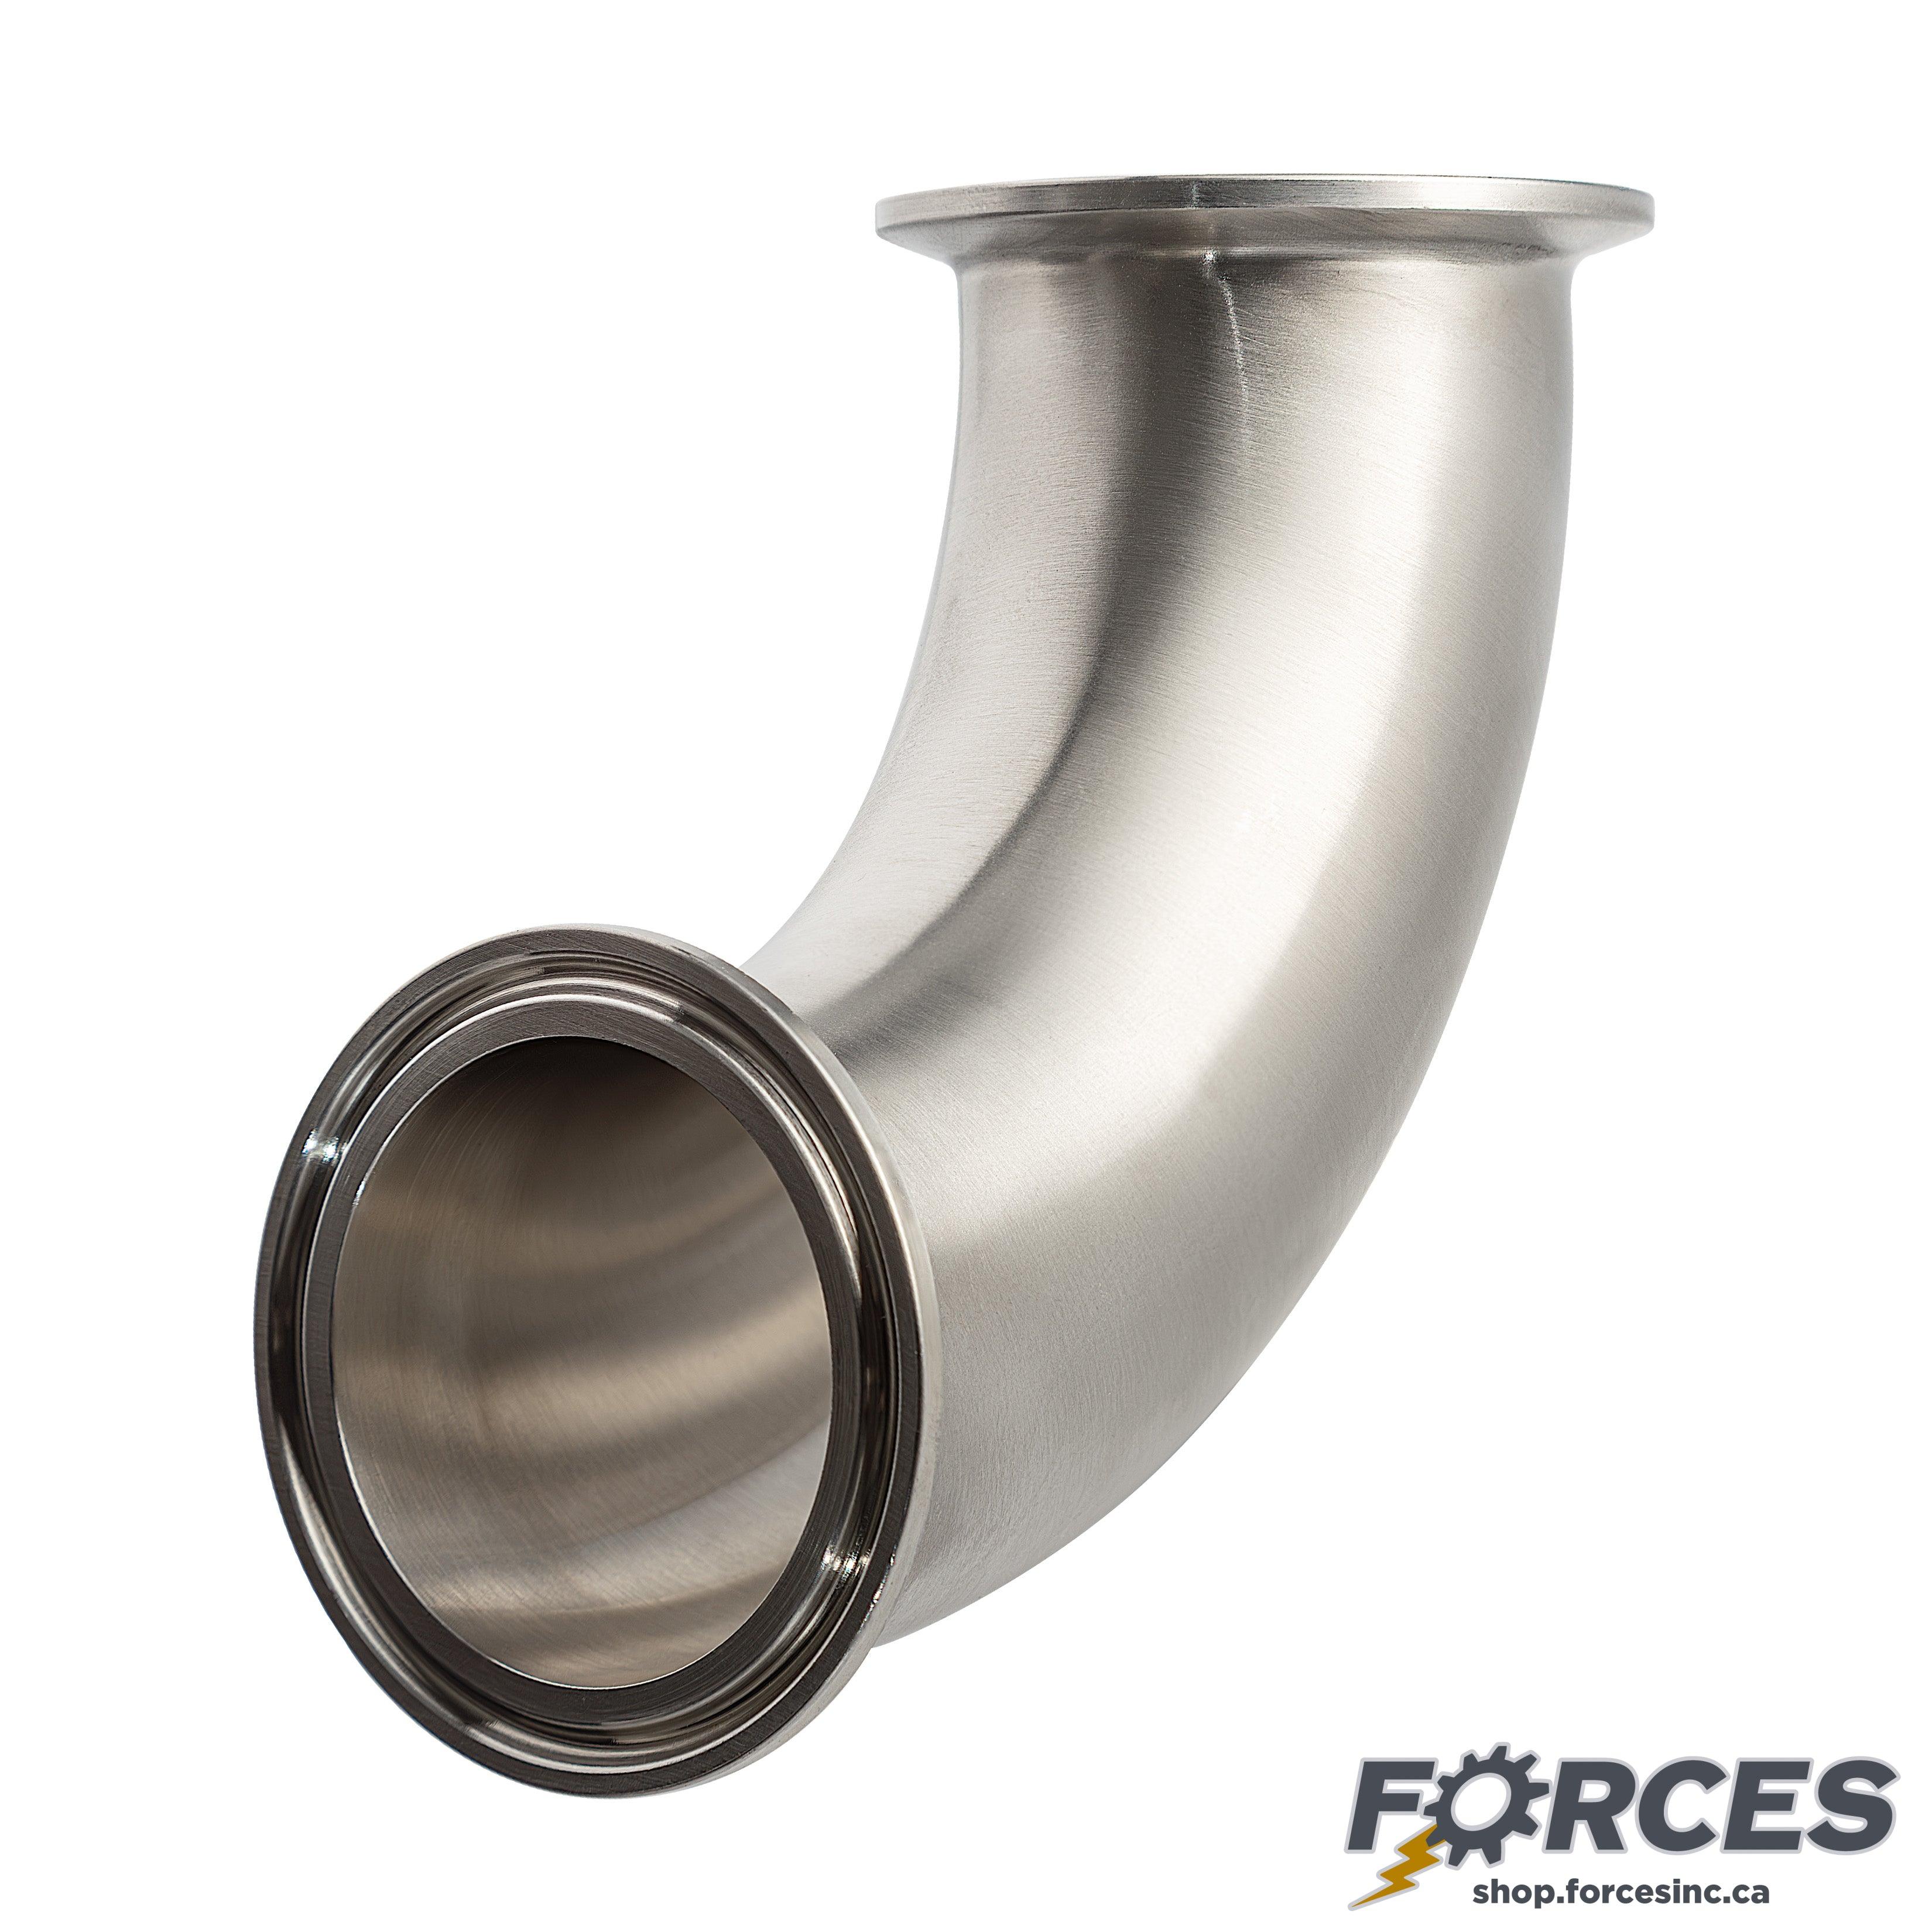 1/2" Tri-Clamp 90° Elbow - Stainless Steel 316 - Forces Inc